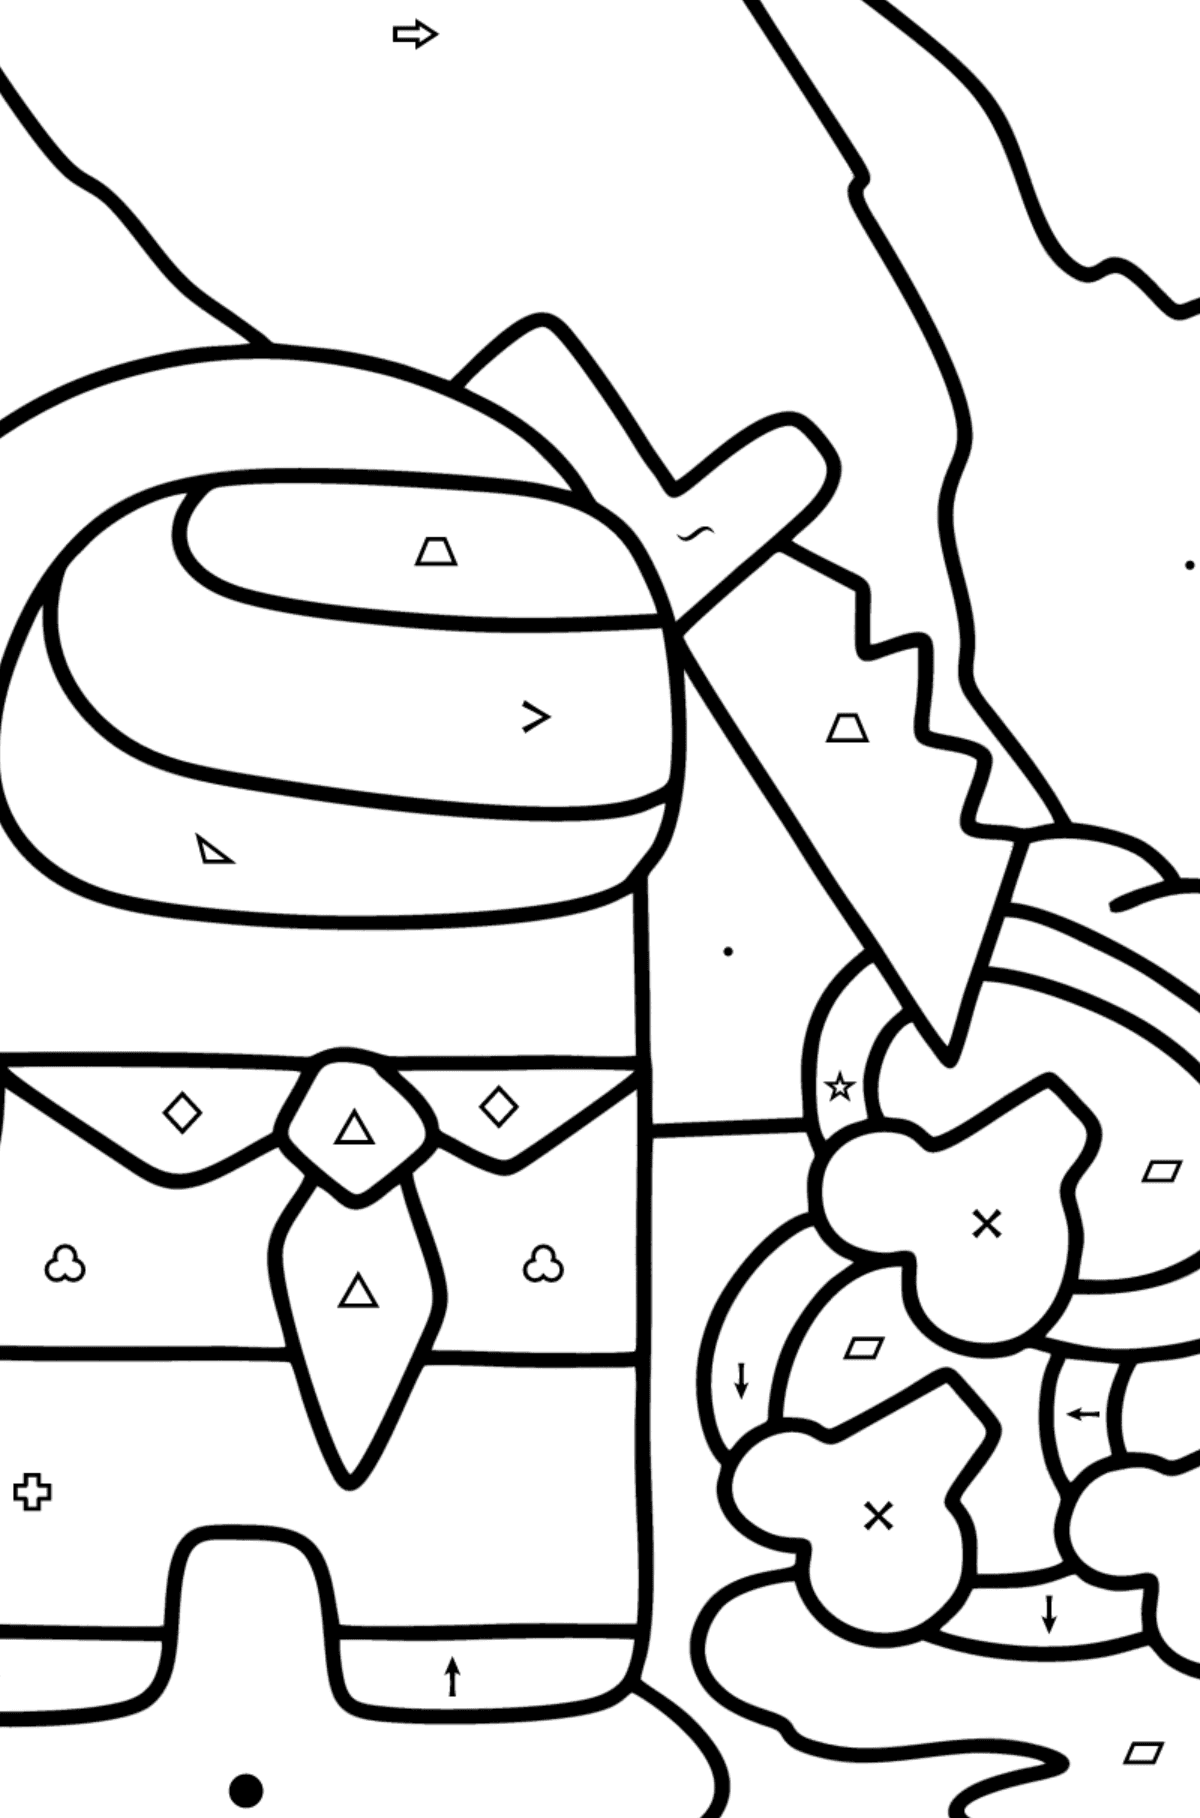 Coloring page Among As Victory - Coloring by Symbols and Geometric Shapes for Kids